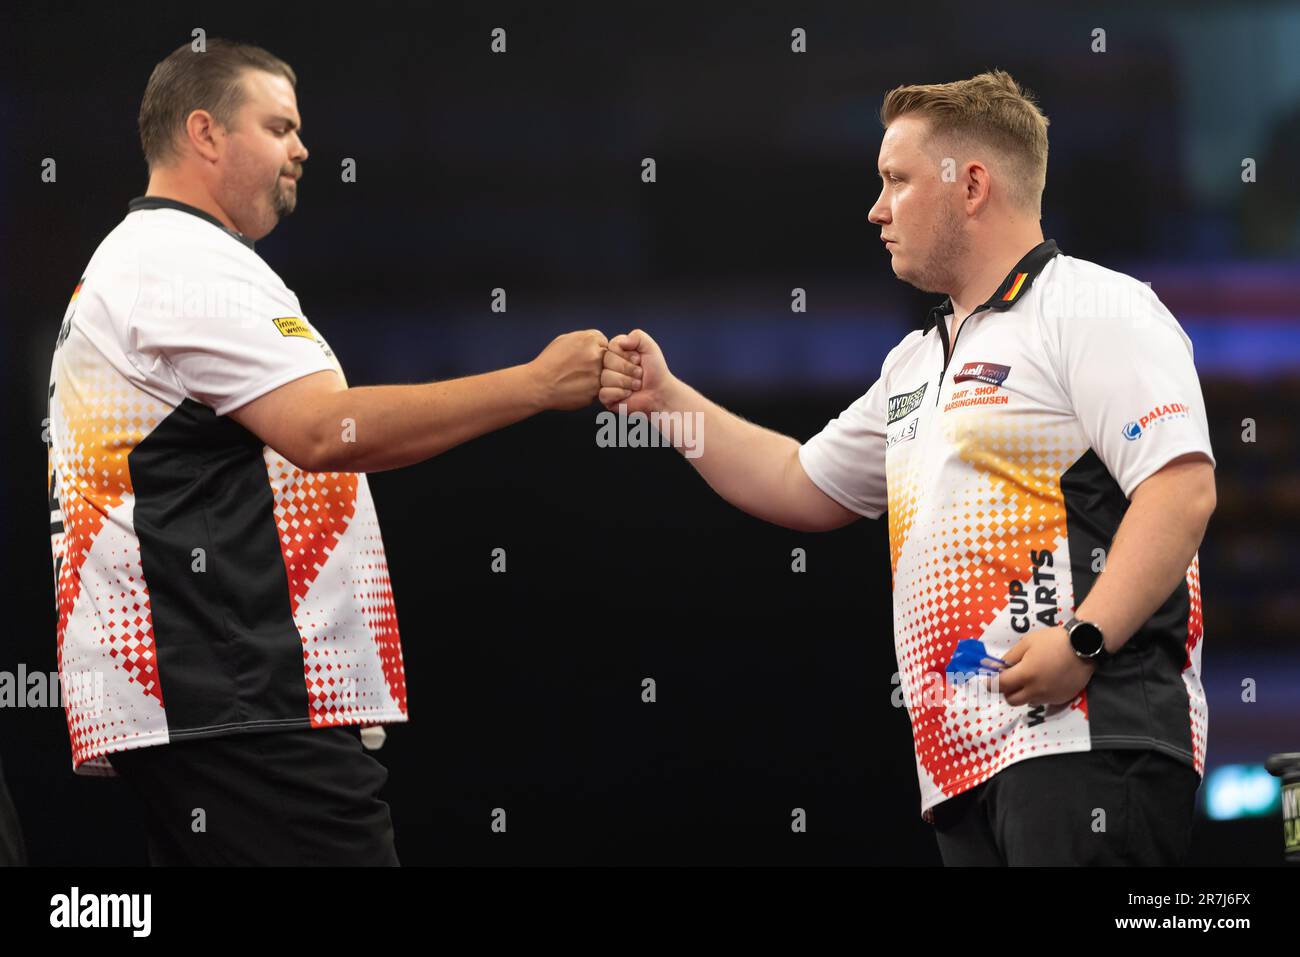 15 June 2023, Hesse, Frankfurt/Main: Darts: World Team Championship, Group  Stage, Group Stage Matches. Martin Schindler (r) from Germany and his  partner Gabriel Clemens react during their first match of the tournament